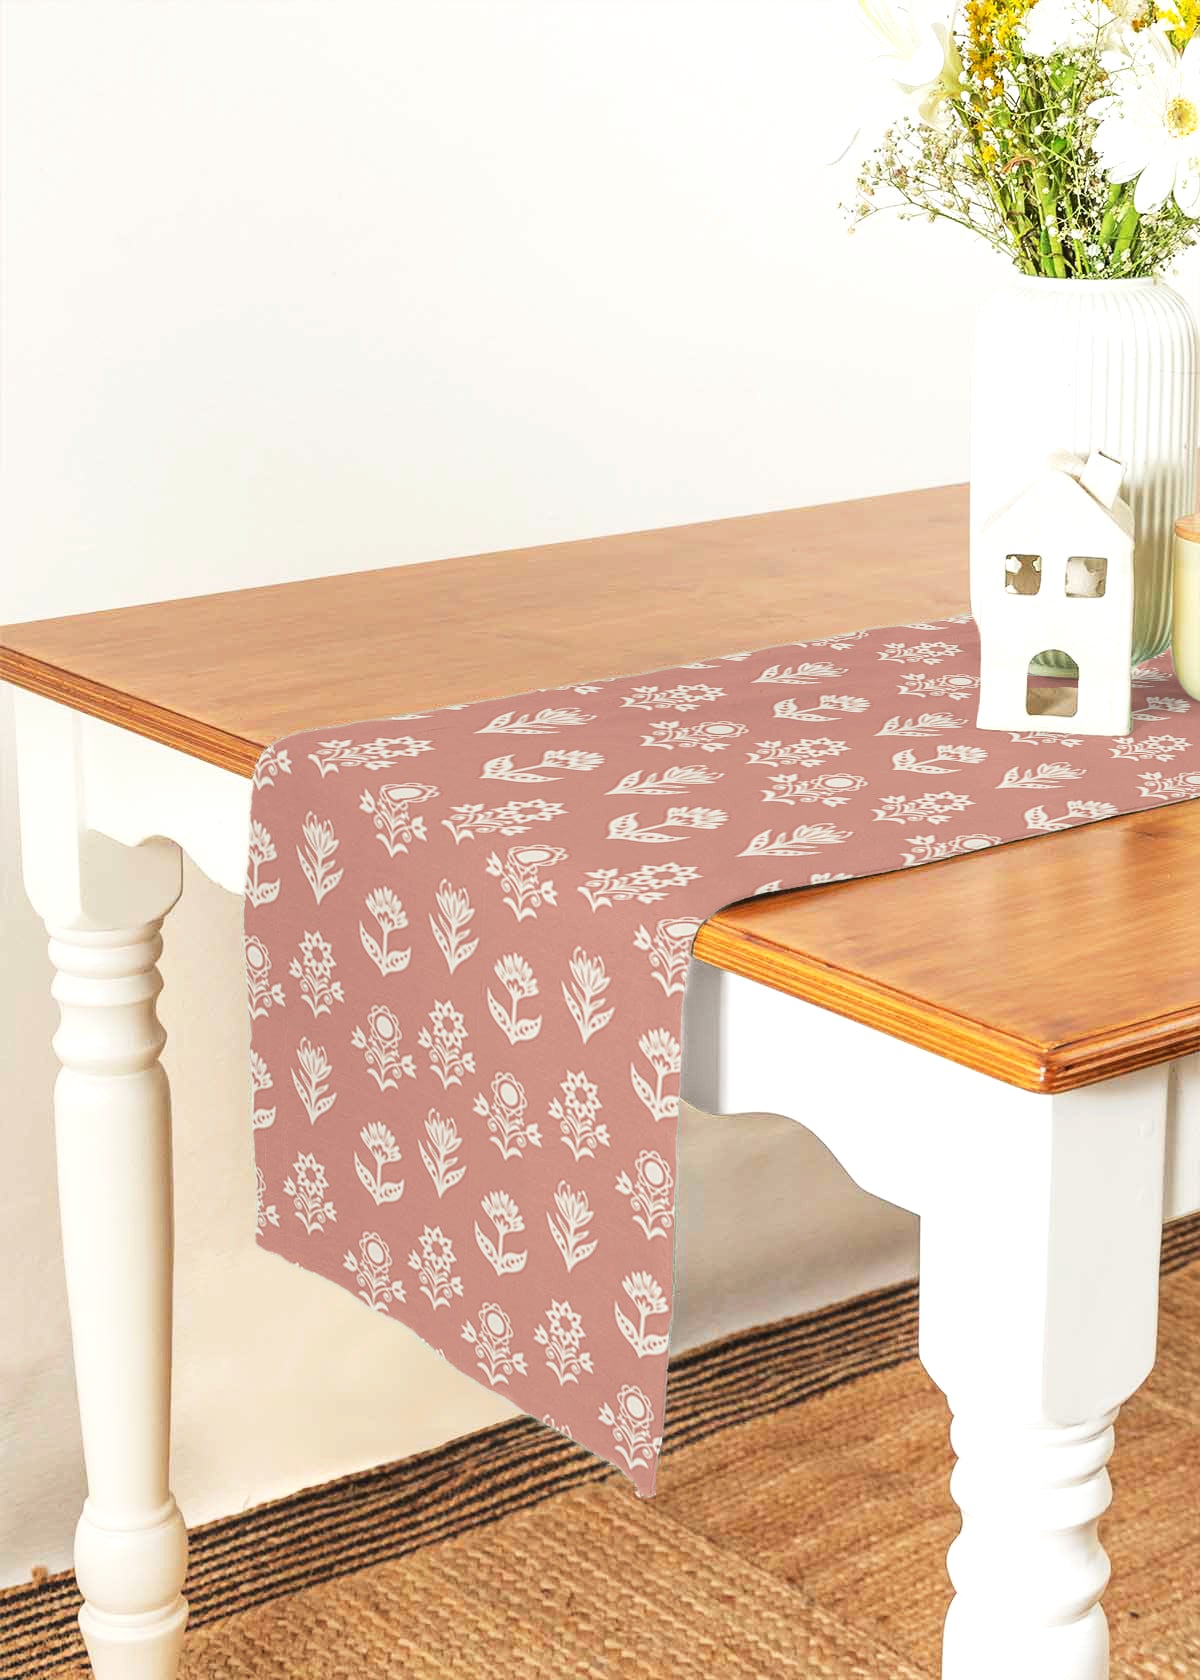 Dahlia 100% cotton floral table runner for 4 seater or 6 seater Dining with tassels - Rust rust